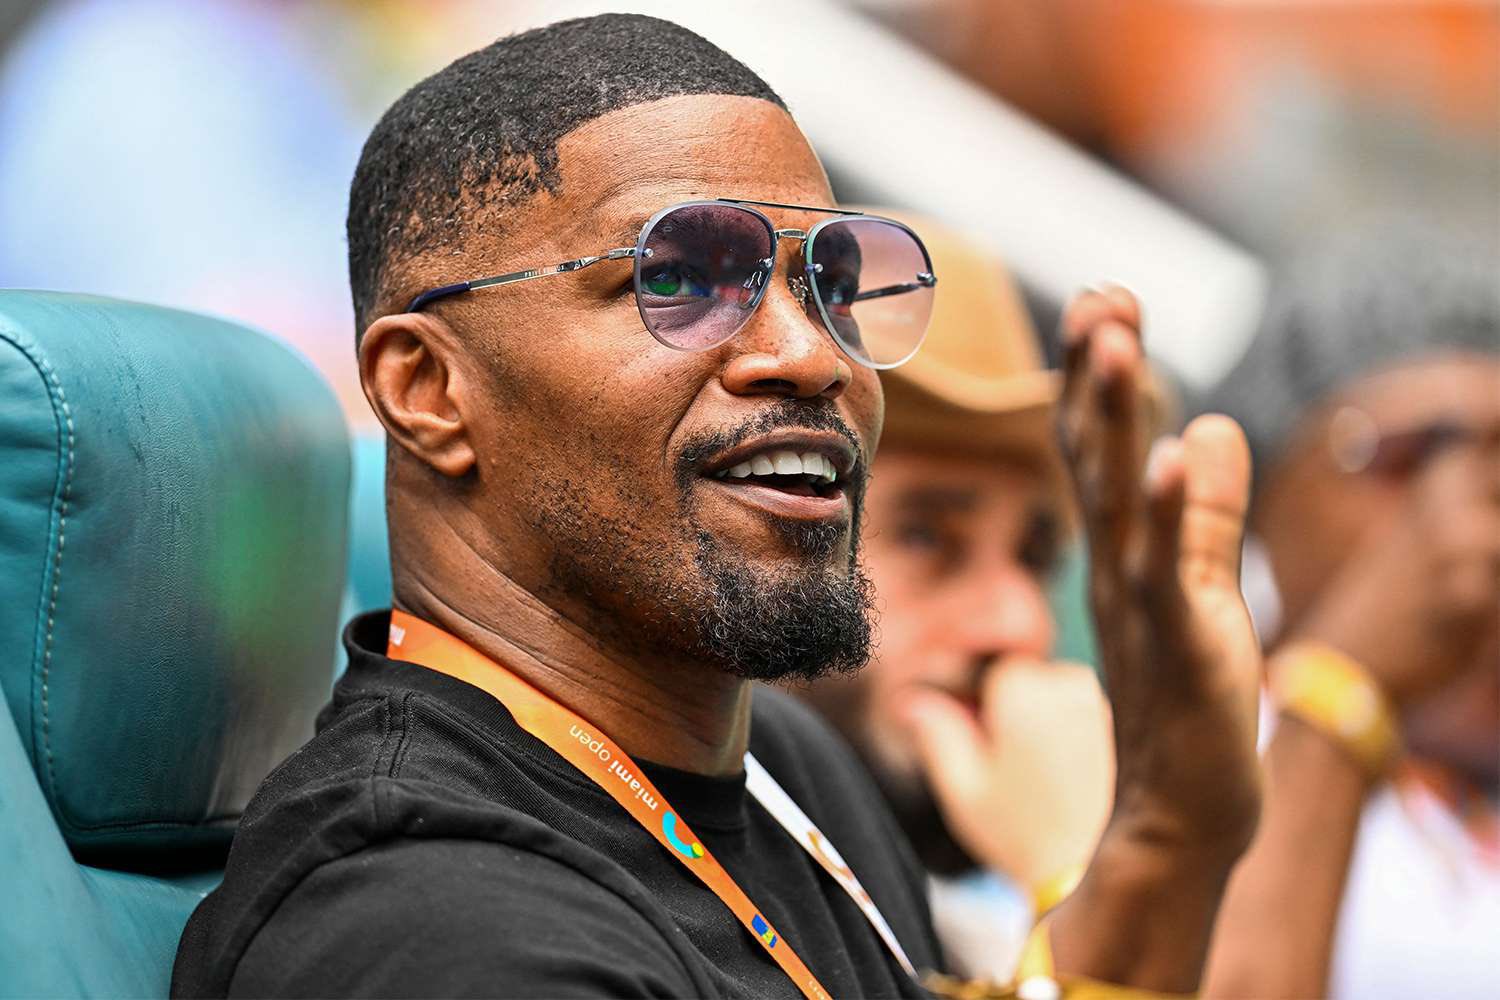 Jamie Foxx body double? Anti-vaxxers’ conspiracy theory goes viral after actor’s first public sighting since hospitalization